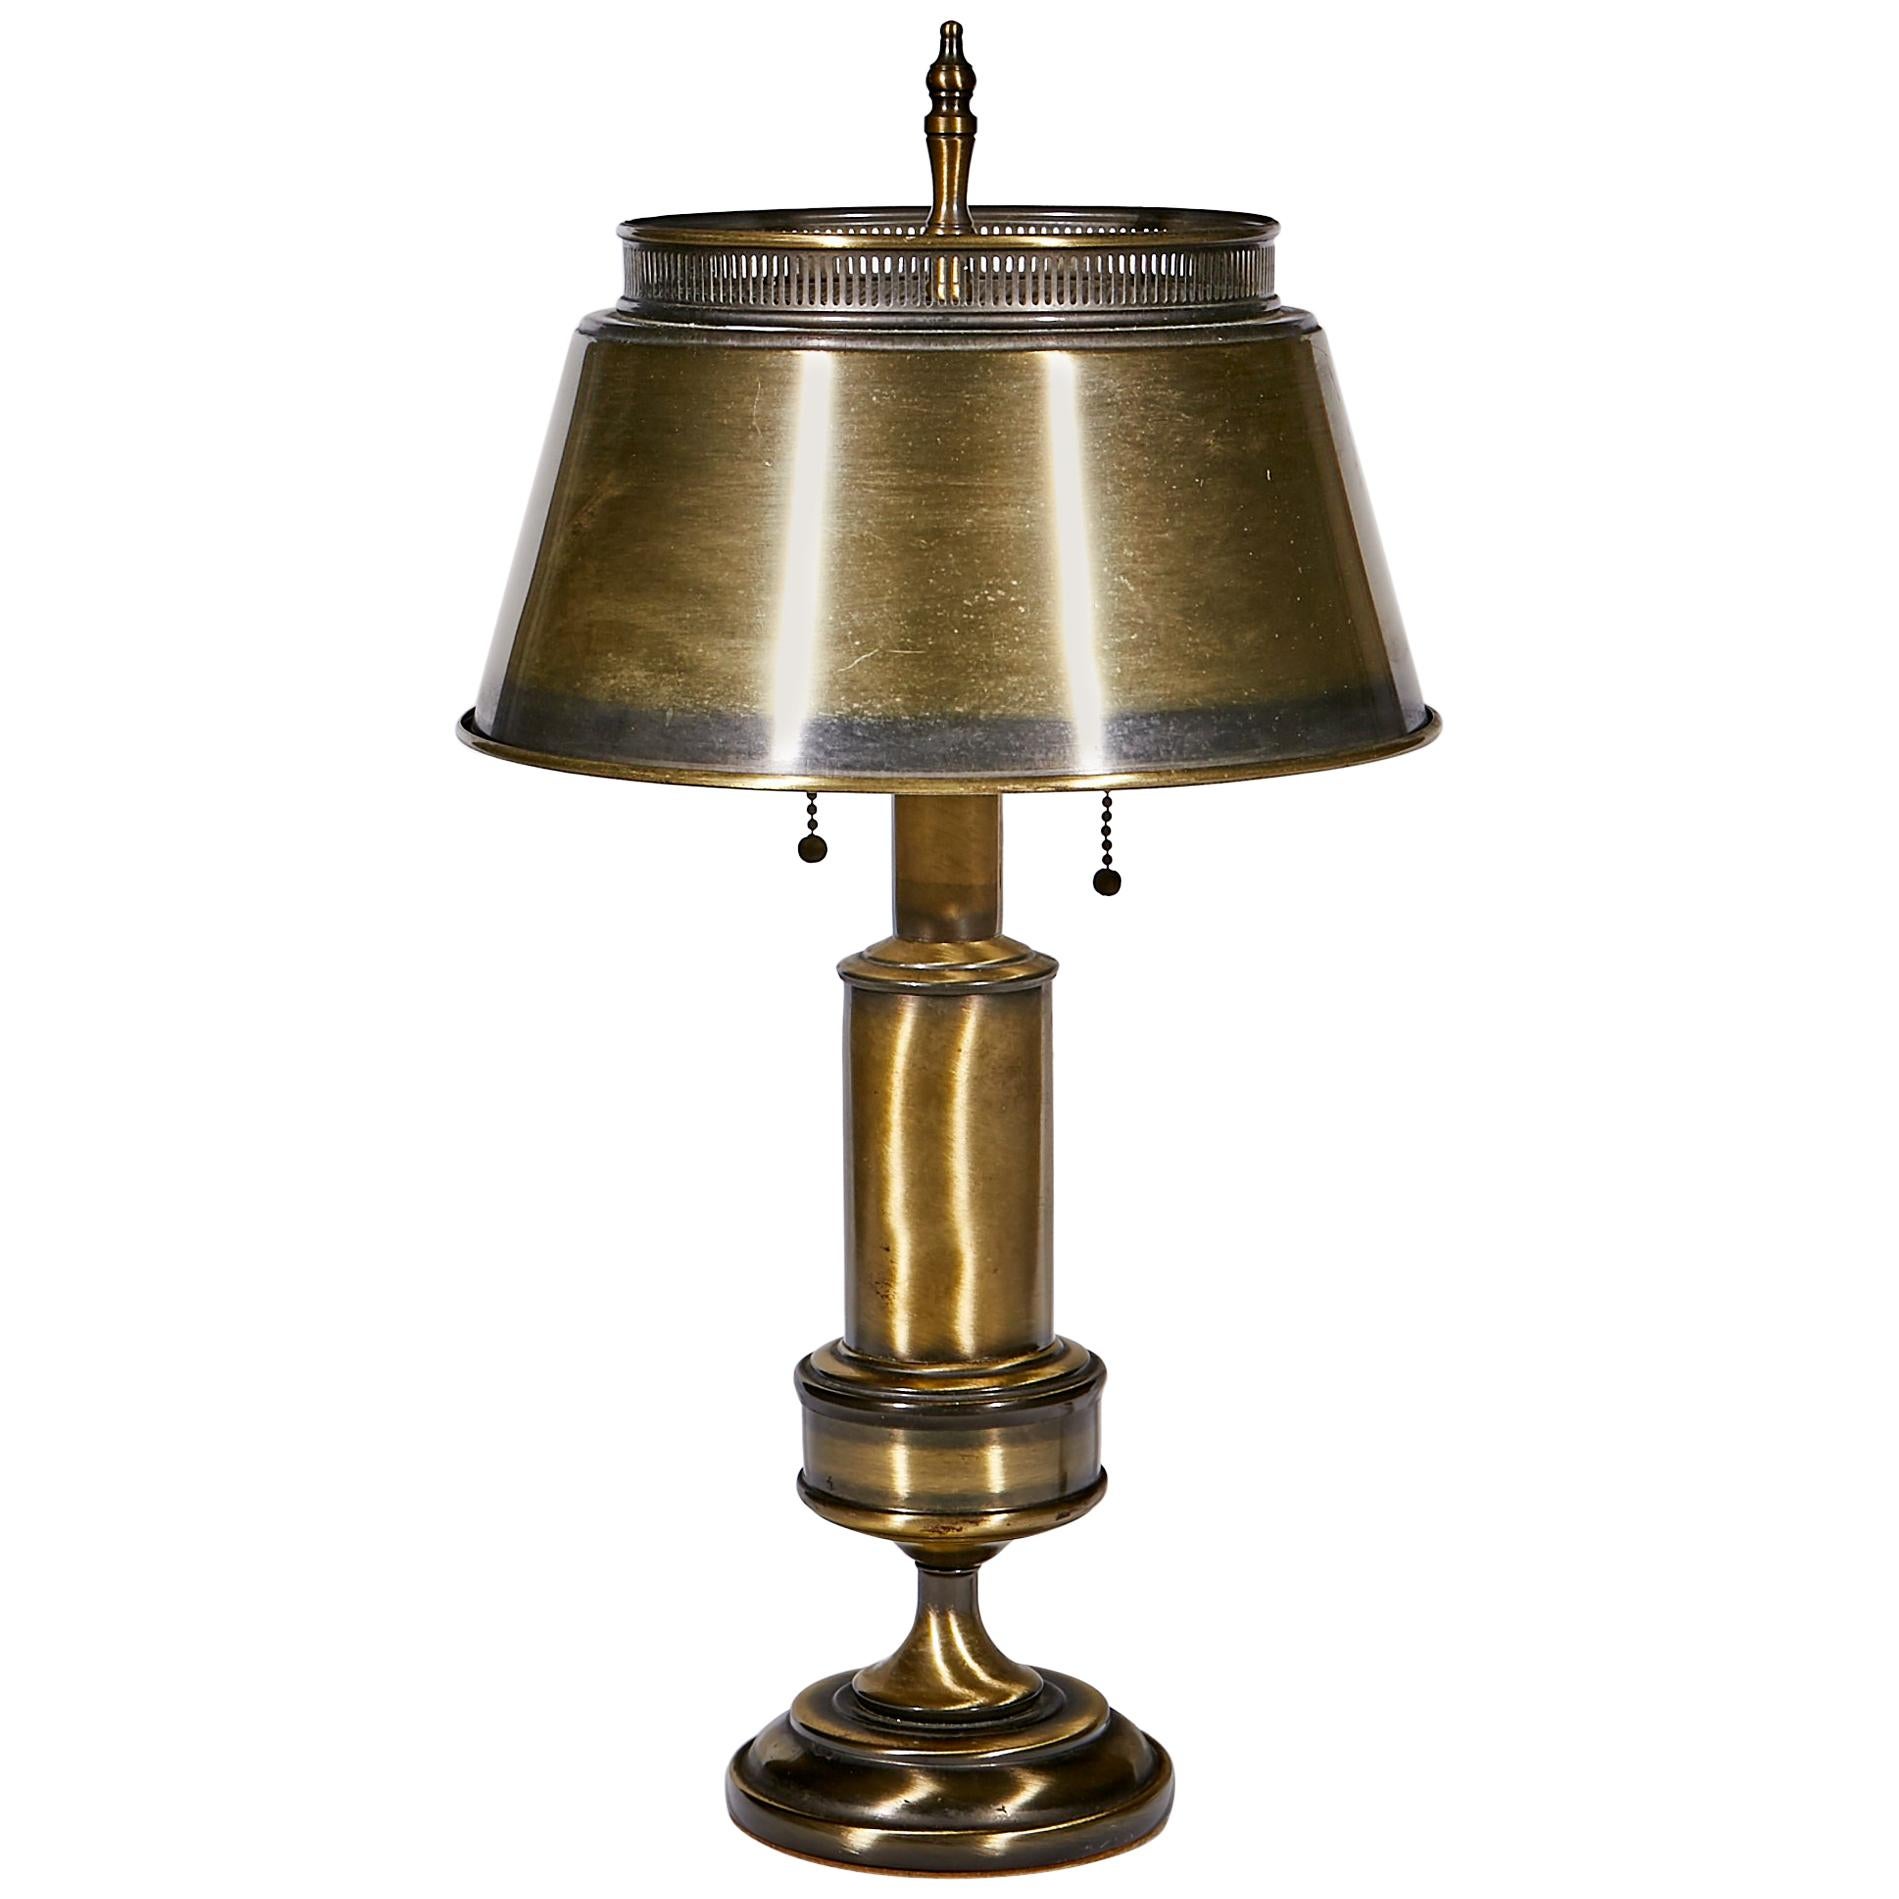 1960s Burnished Brass Table Lamp